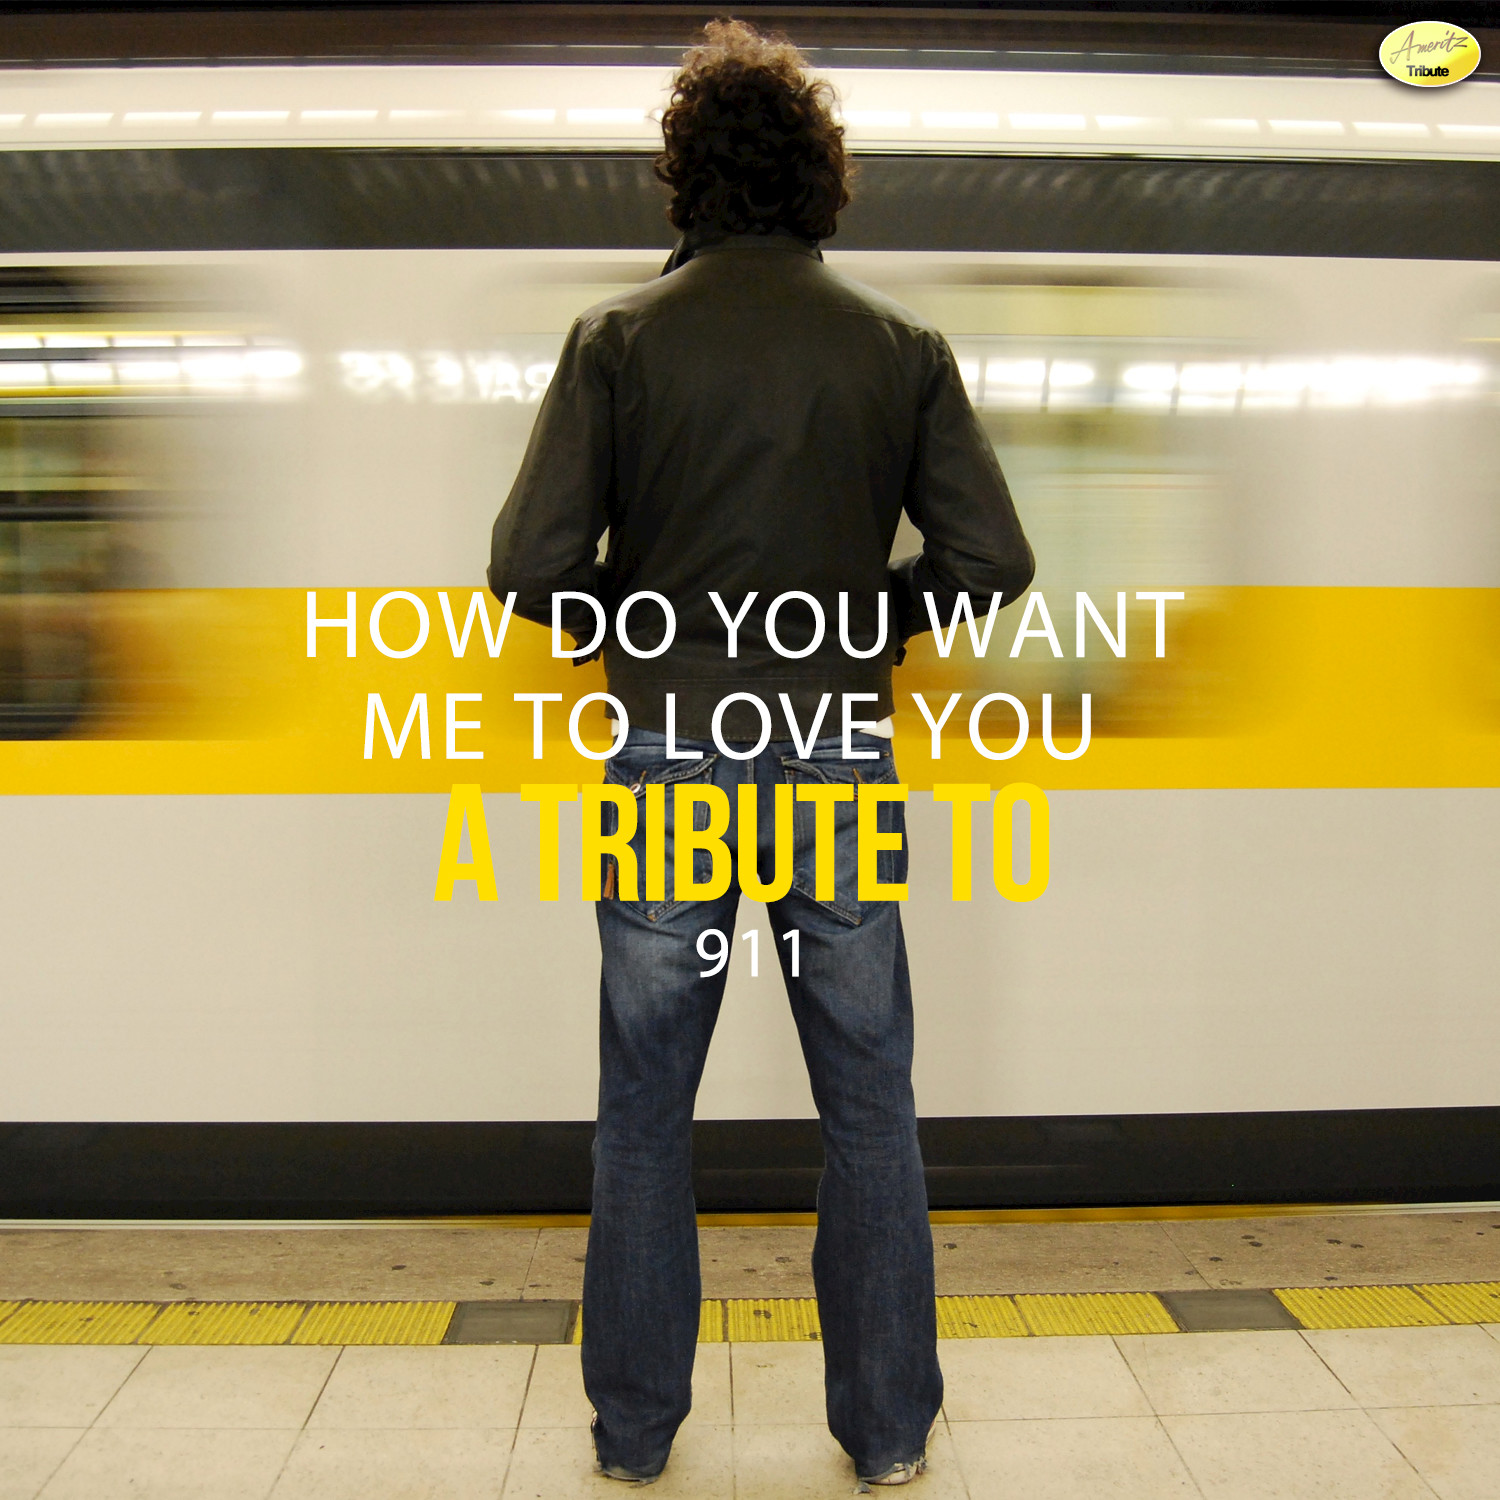 How Do You Want Me to Love You - A Tribute to 911